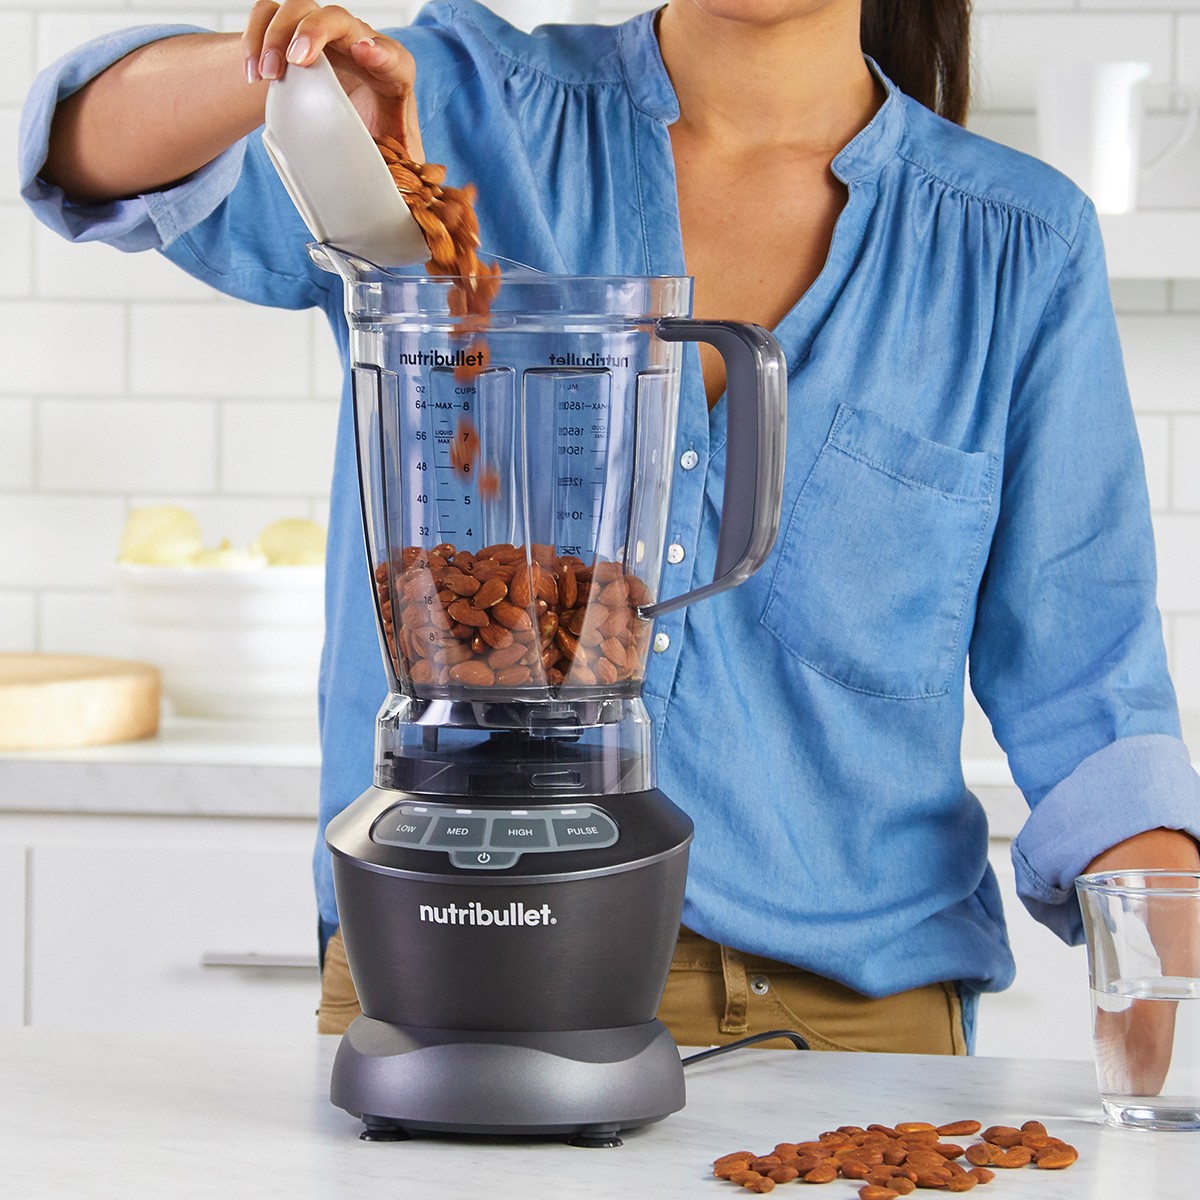 https://s3-assets.quenchessentials.com/media/images/products/nutribullet-nbf50400-blender-lifestyle-1.jpg